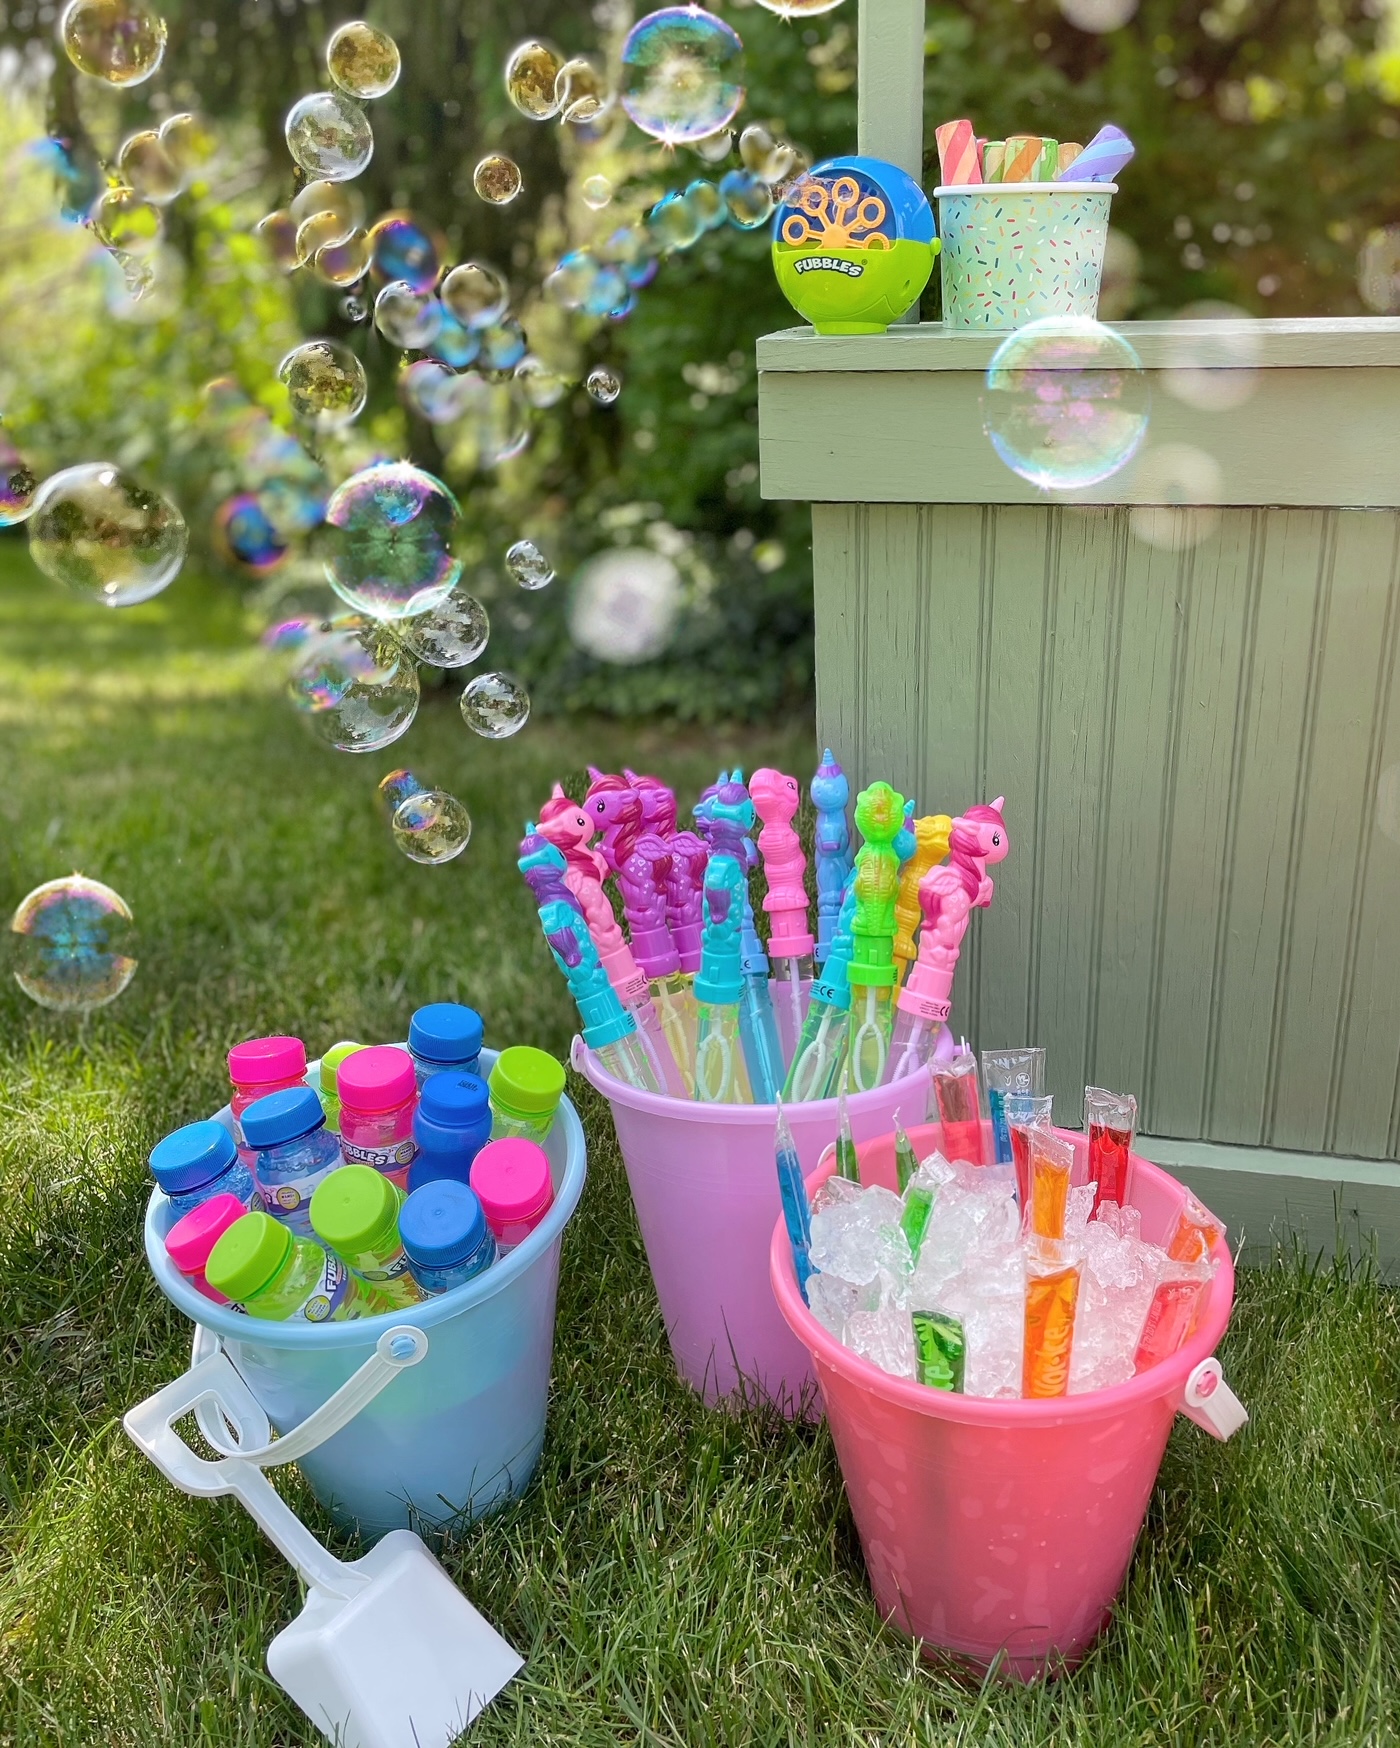 Summer Party Ideas for Creatively Filling Drink Dispensers